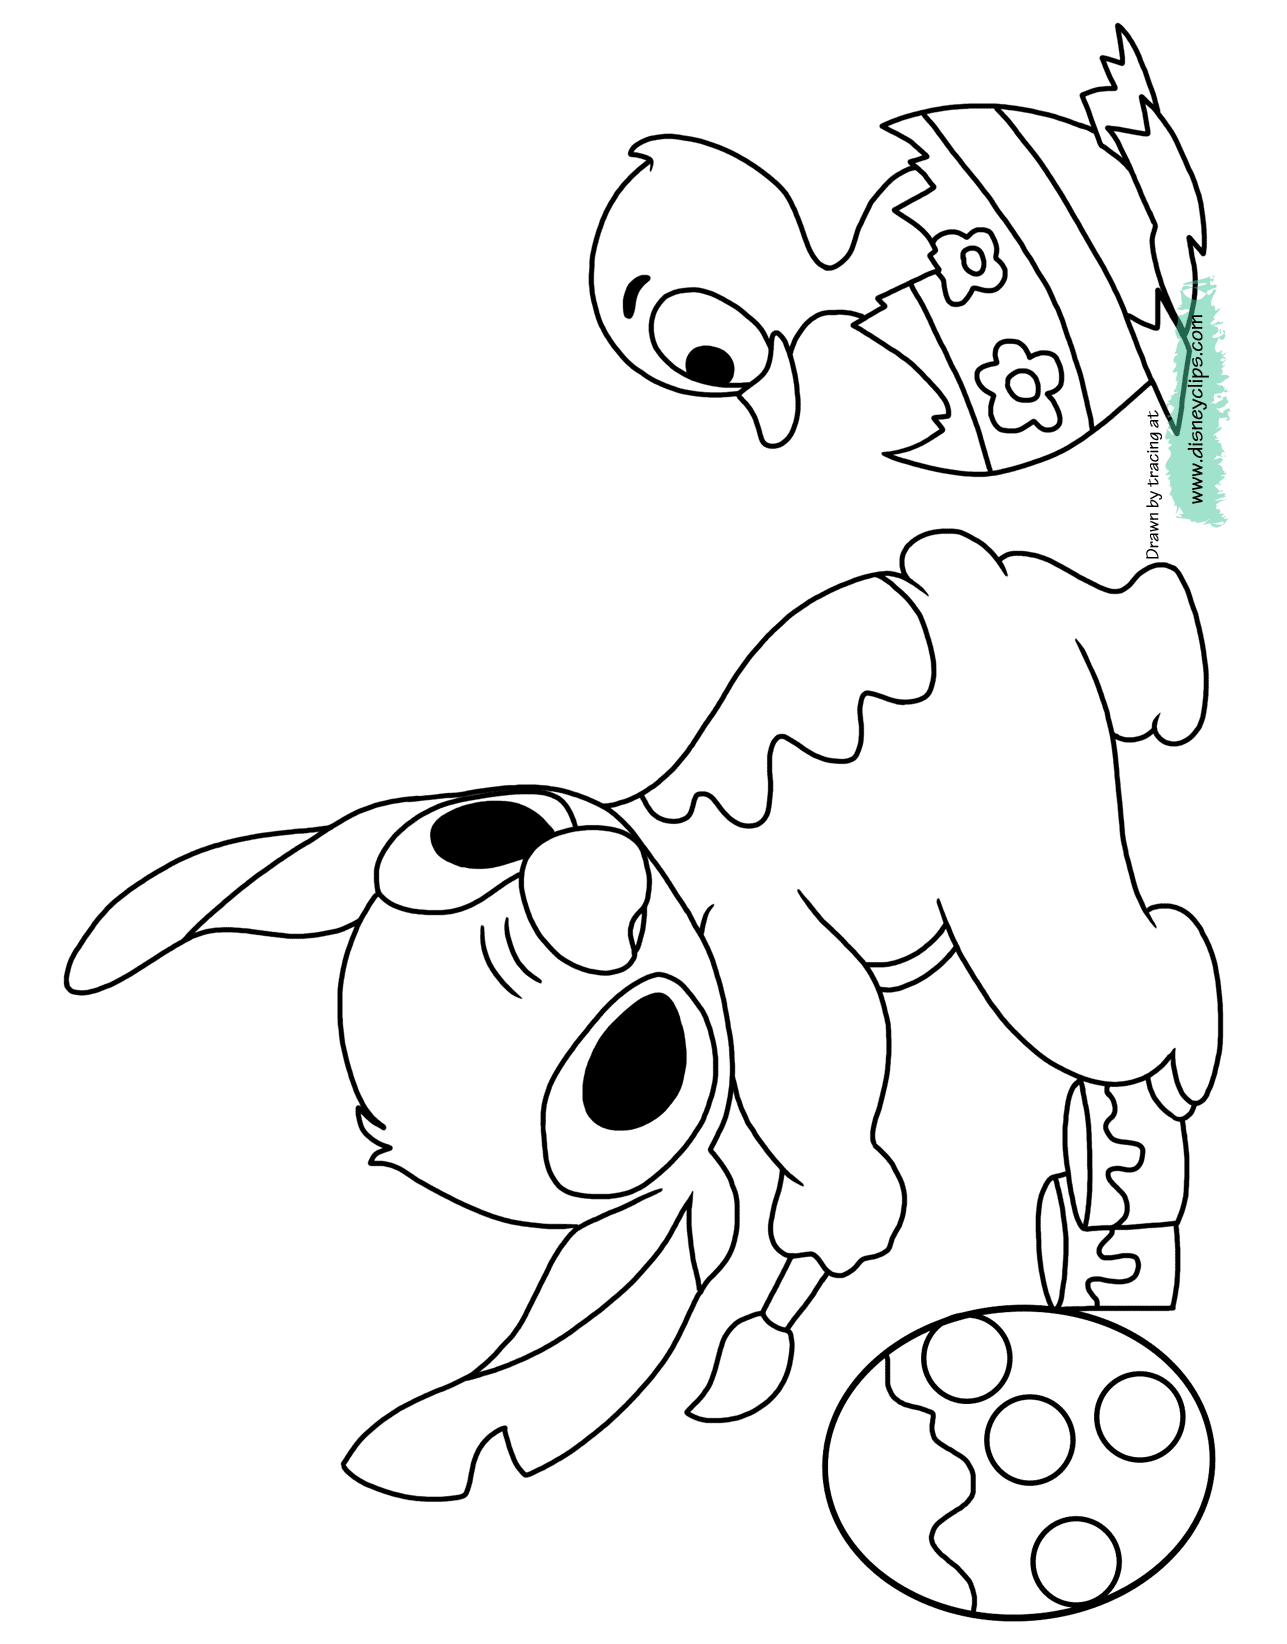 Printable Disney Easter Coloring Pages 5   Disneyclips.com